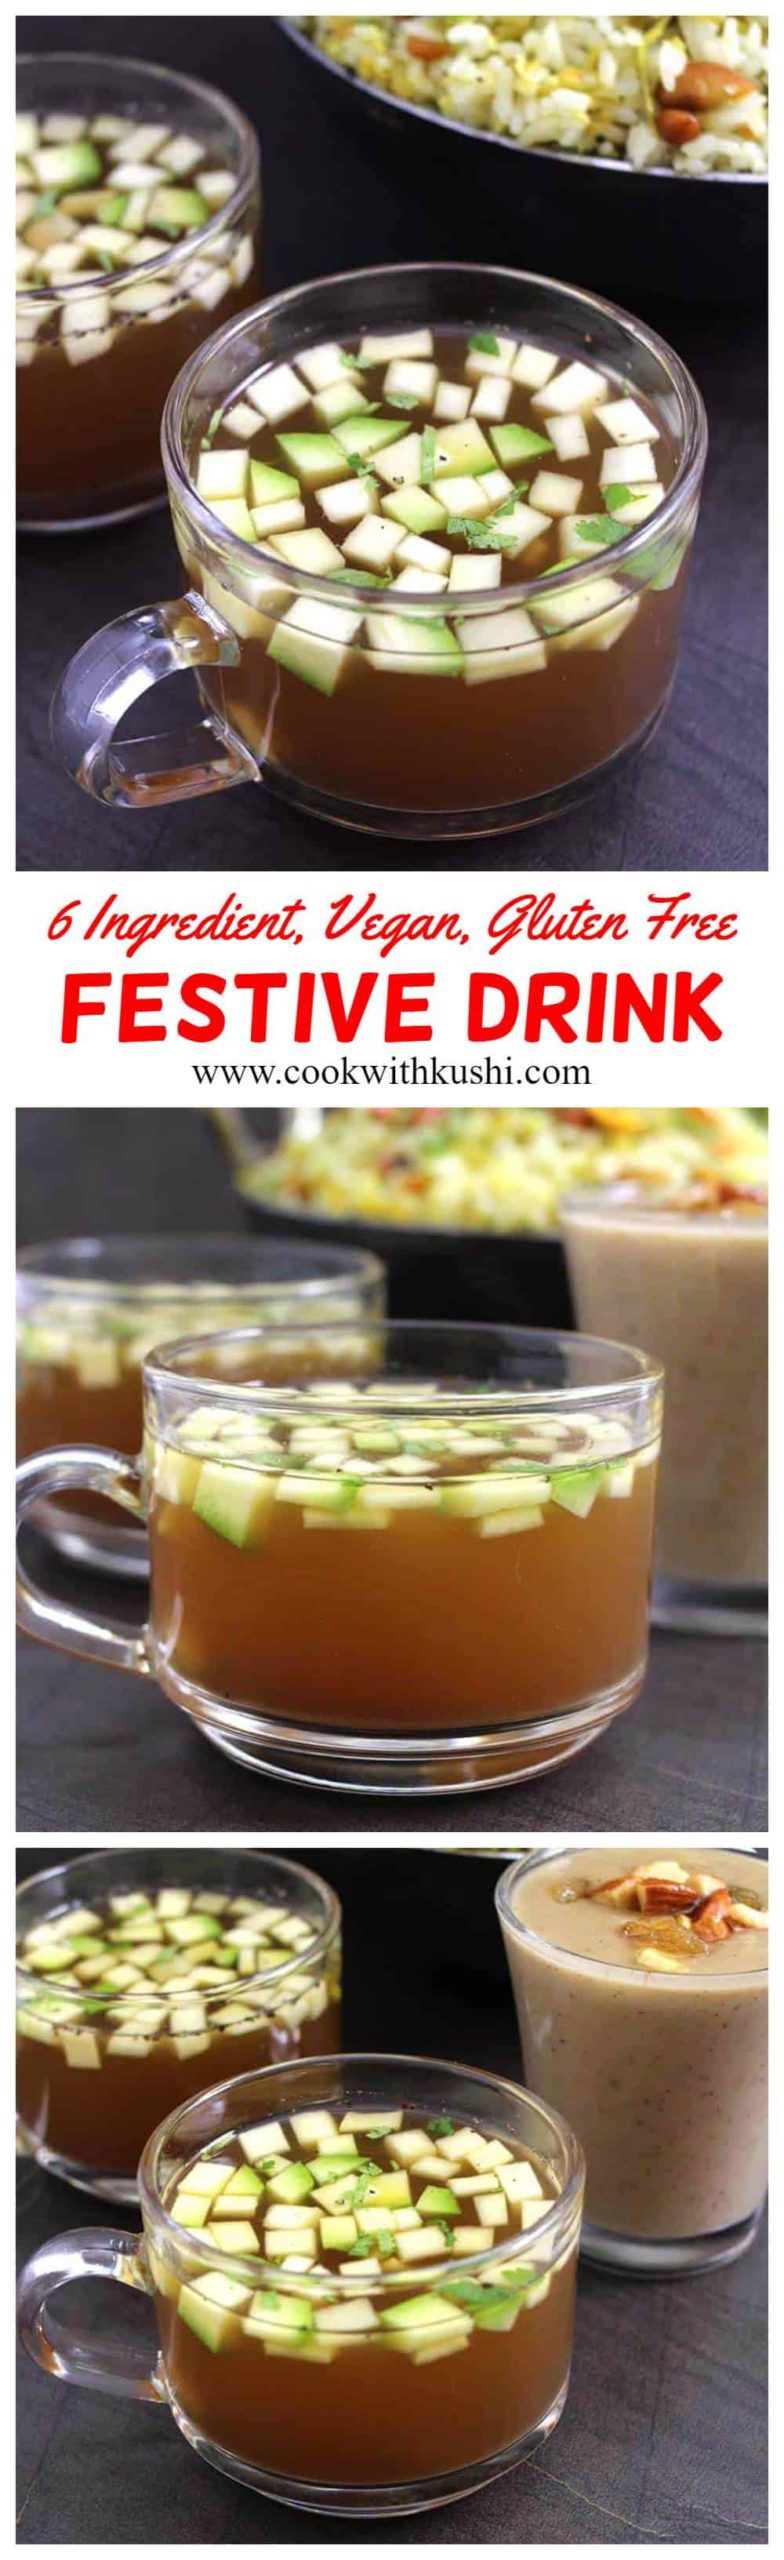  Ugadi Pachadi or Bevu Bella Panakam is festive drink that consists of 6 ingredients having 6 different taste (sweet, sour, salt, spicy, pungent and bitter). It symbolizes ups and downs of life -  that one must accept all the flavors of experiences coming in this new year. #ugadi #gudipadwa #holi #ramnavami #festivedrink #indianfestival #festivalfood #pachadi #panakam #ganeshchaturthi #prasadam #southindianfood #festivalandfood